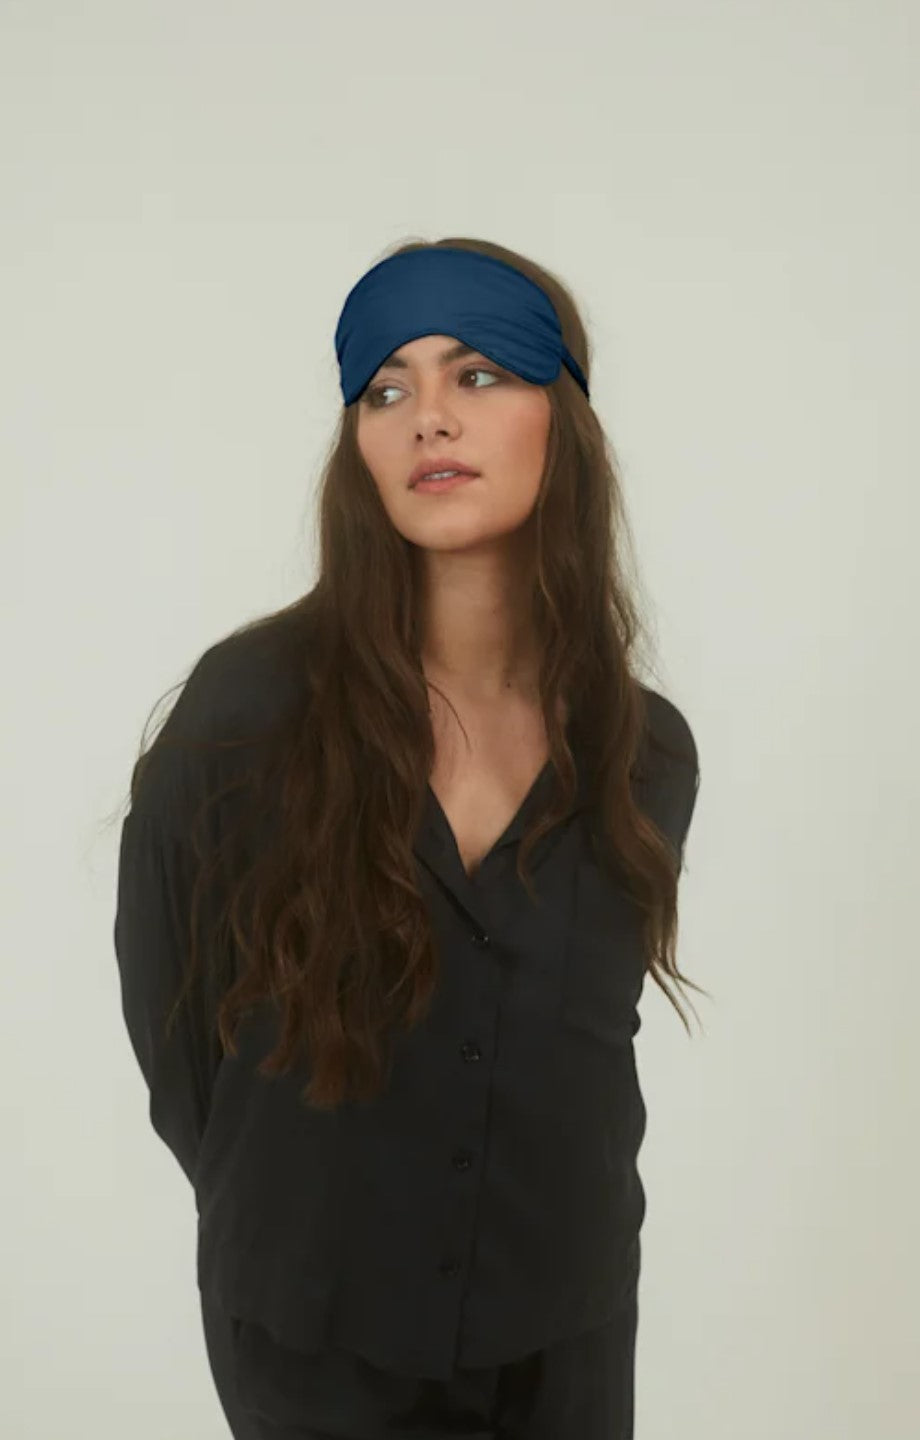 Bamboo Silk Sleep Mask - Ocean Blue PRE ORDER AVAILAVLE. Expected arrive into stock in 6-8 weeks.